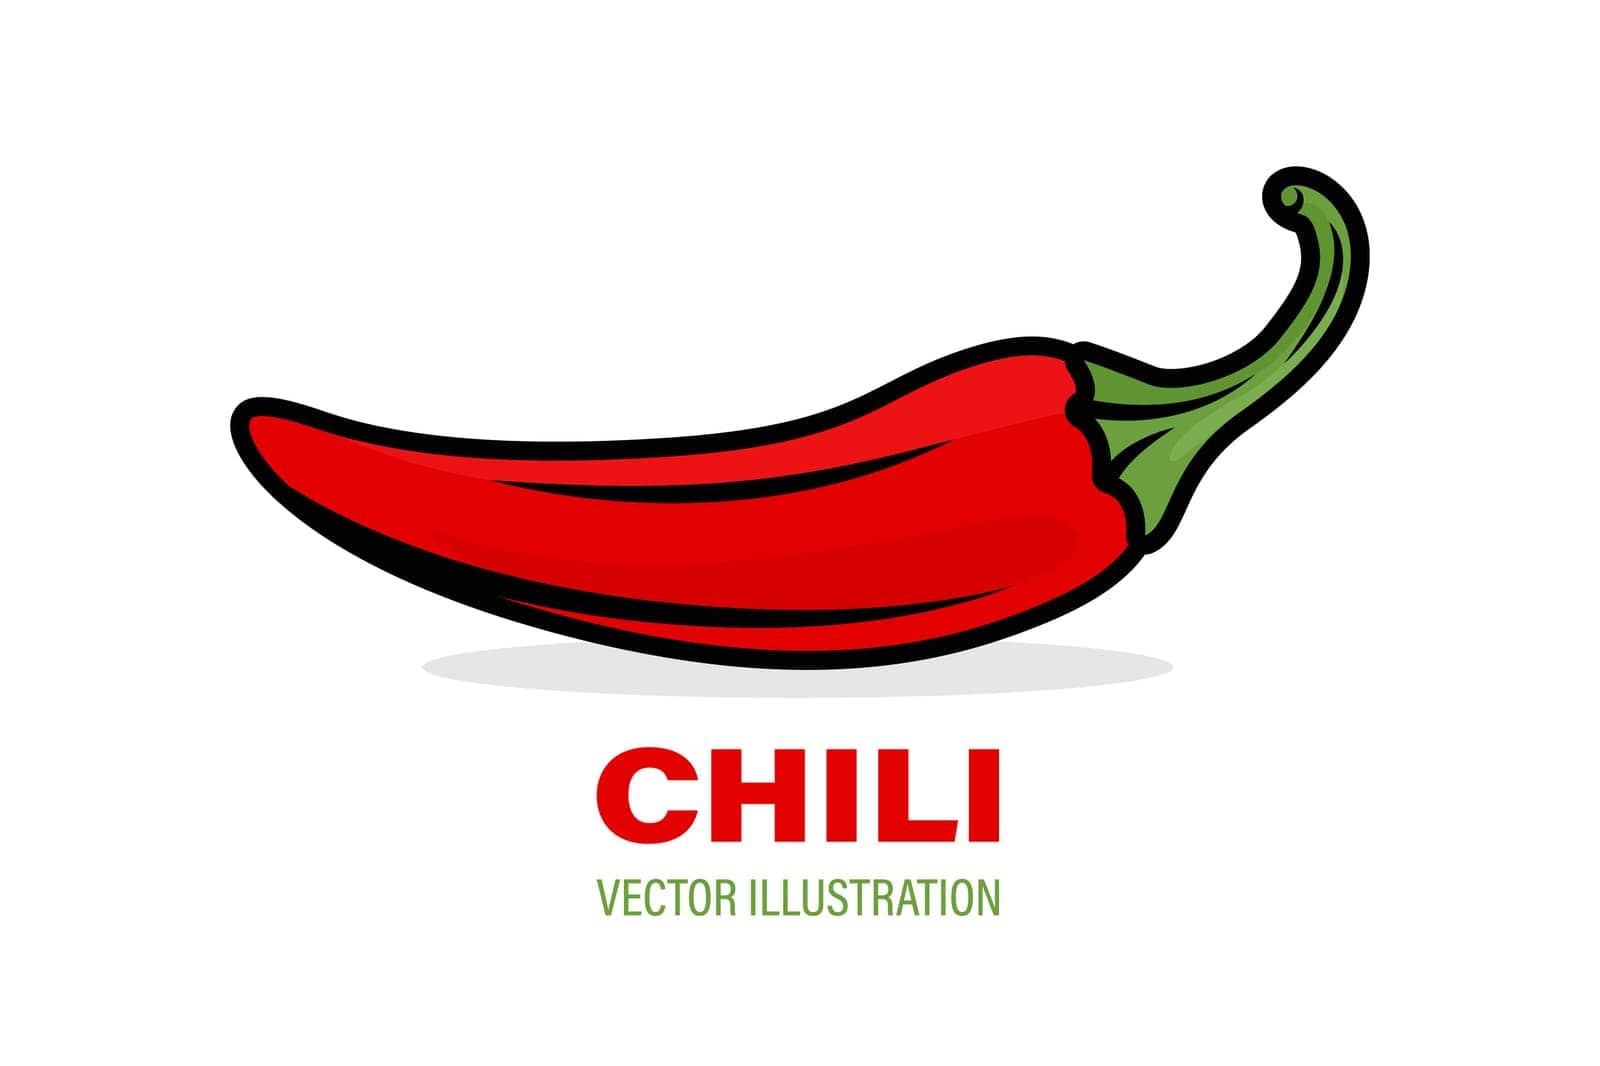 Flat Vector Design Template of Whole Fresh Hot Chili Pepper Closeup Isolated. Spicy Chili Pepper in Front View. Vector Chili Pepper Illustration for Culinary, Cooking, and Spicy Food Concept by Gomolach